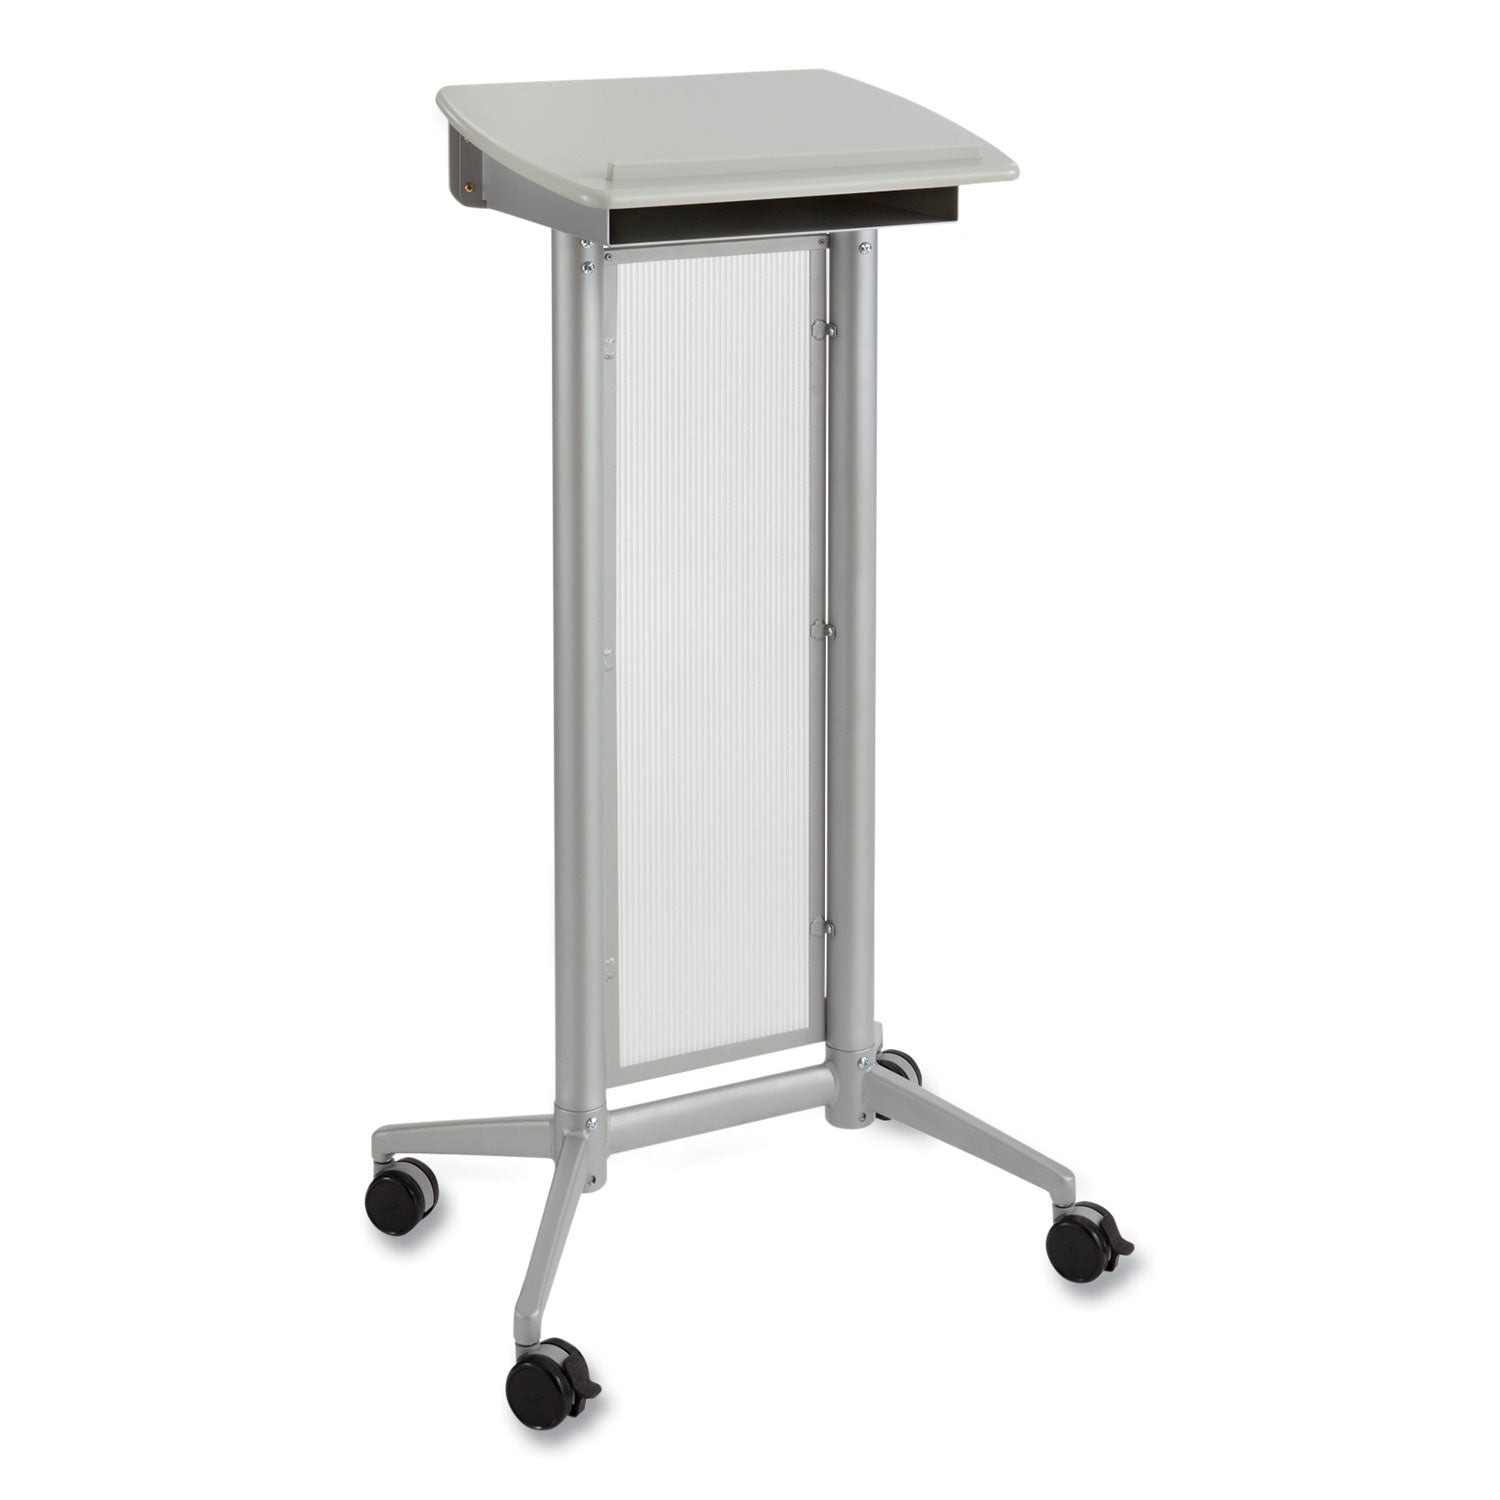 Impromptu Lectern, 26.5 x 18.75 x 46.5, Gray, Ships in 1-3 Business Days - 